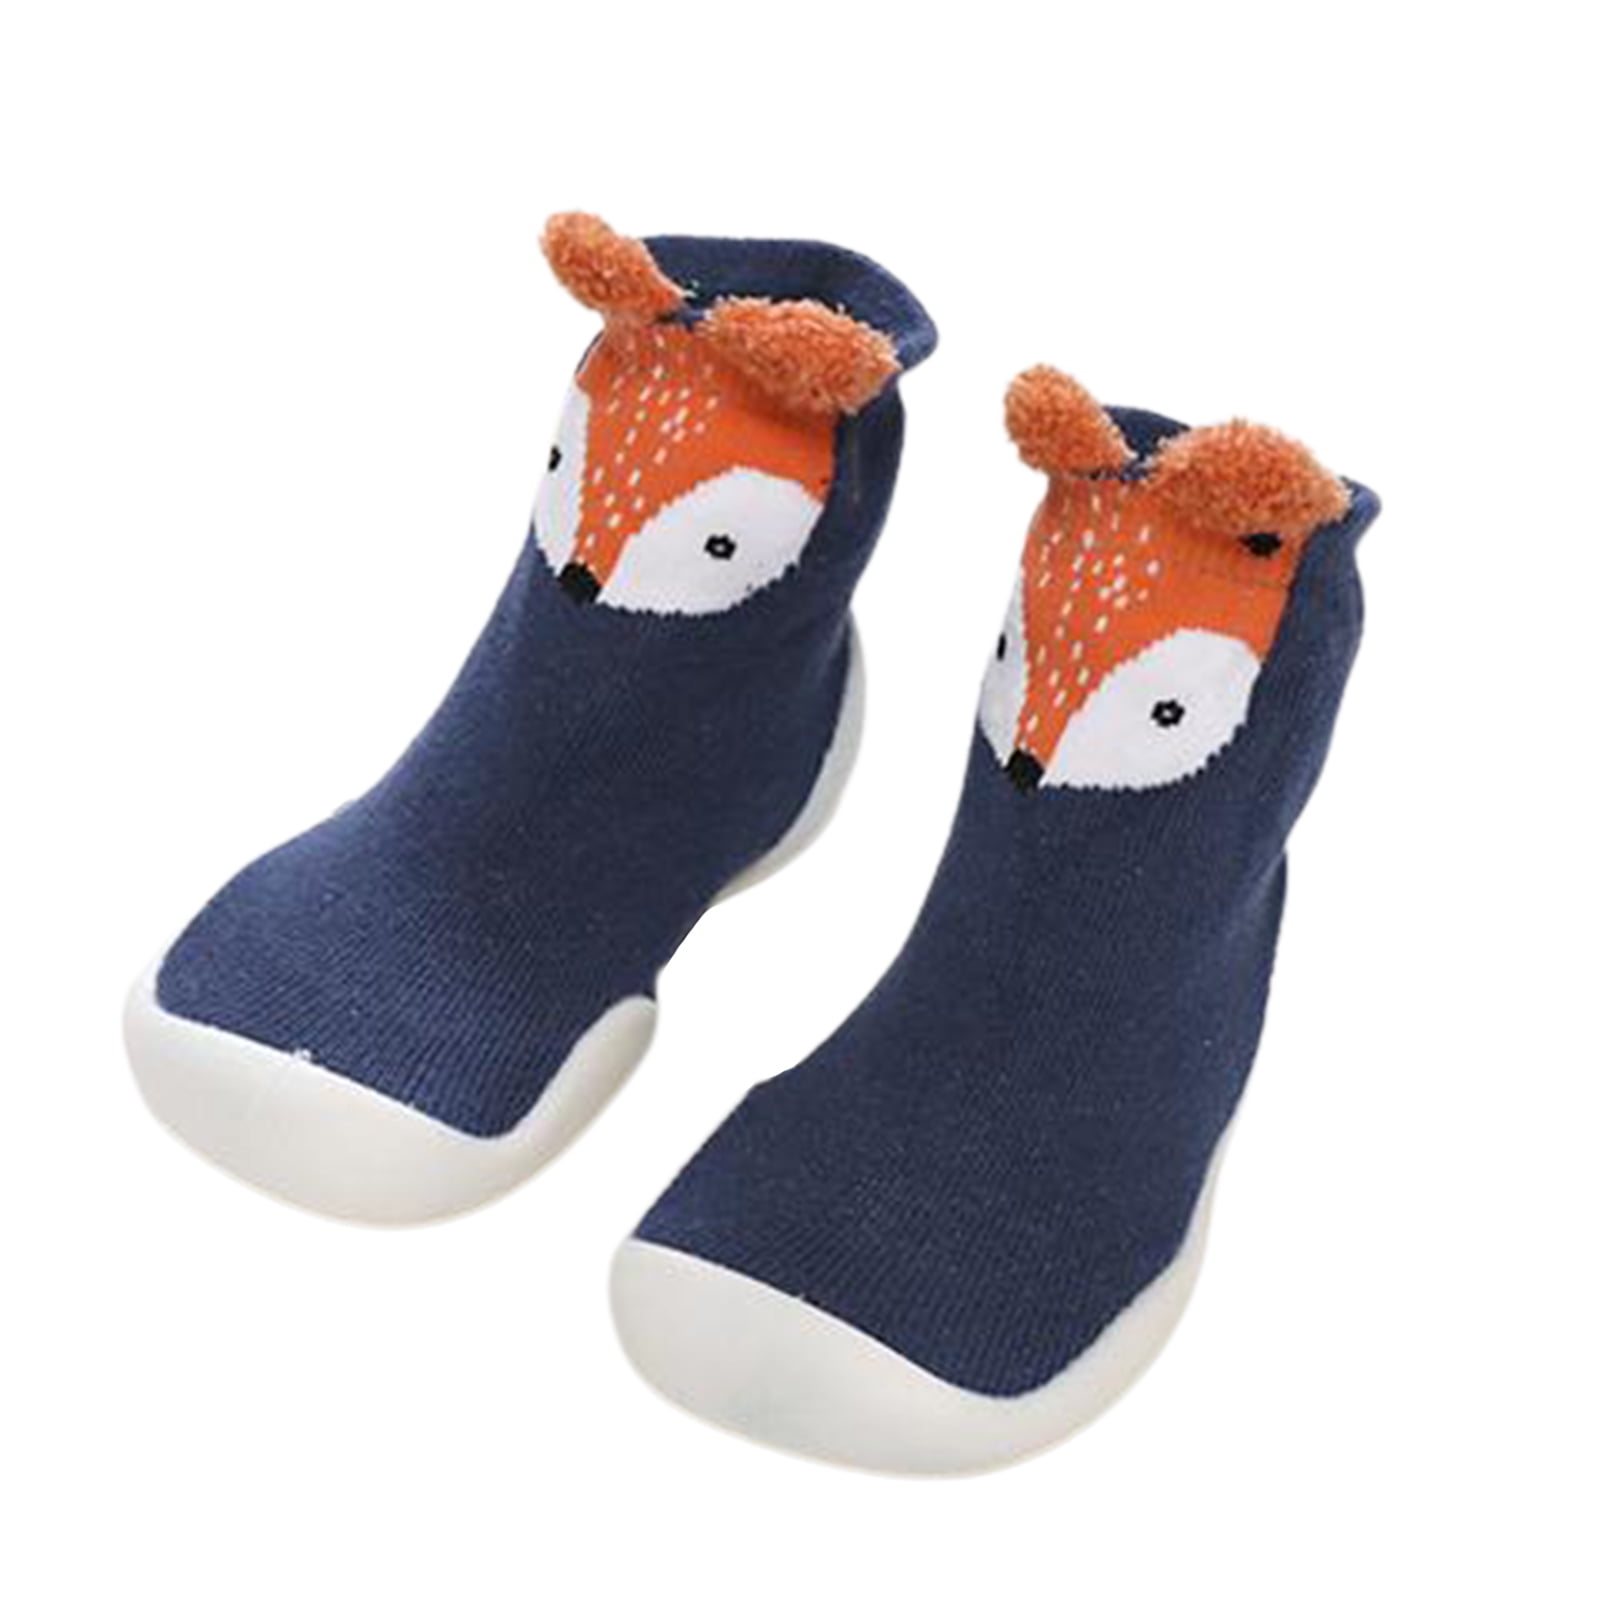 KAOU Cartoon Animals Baby Anti Slip Floor Socks High Top Shoes with Soft  Thick Sole 